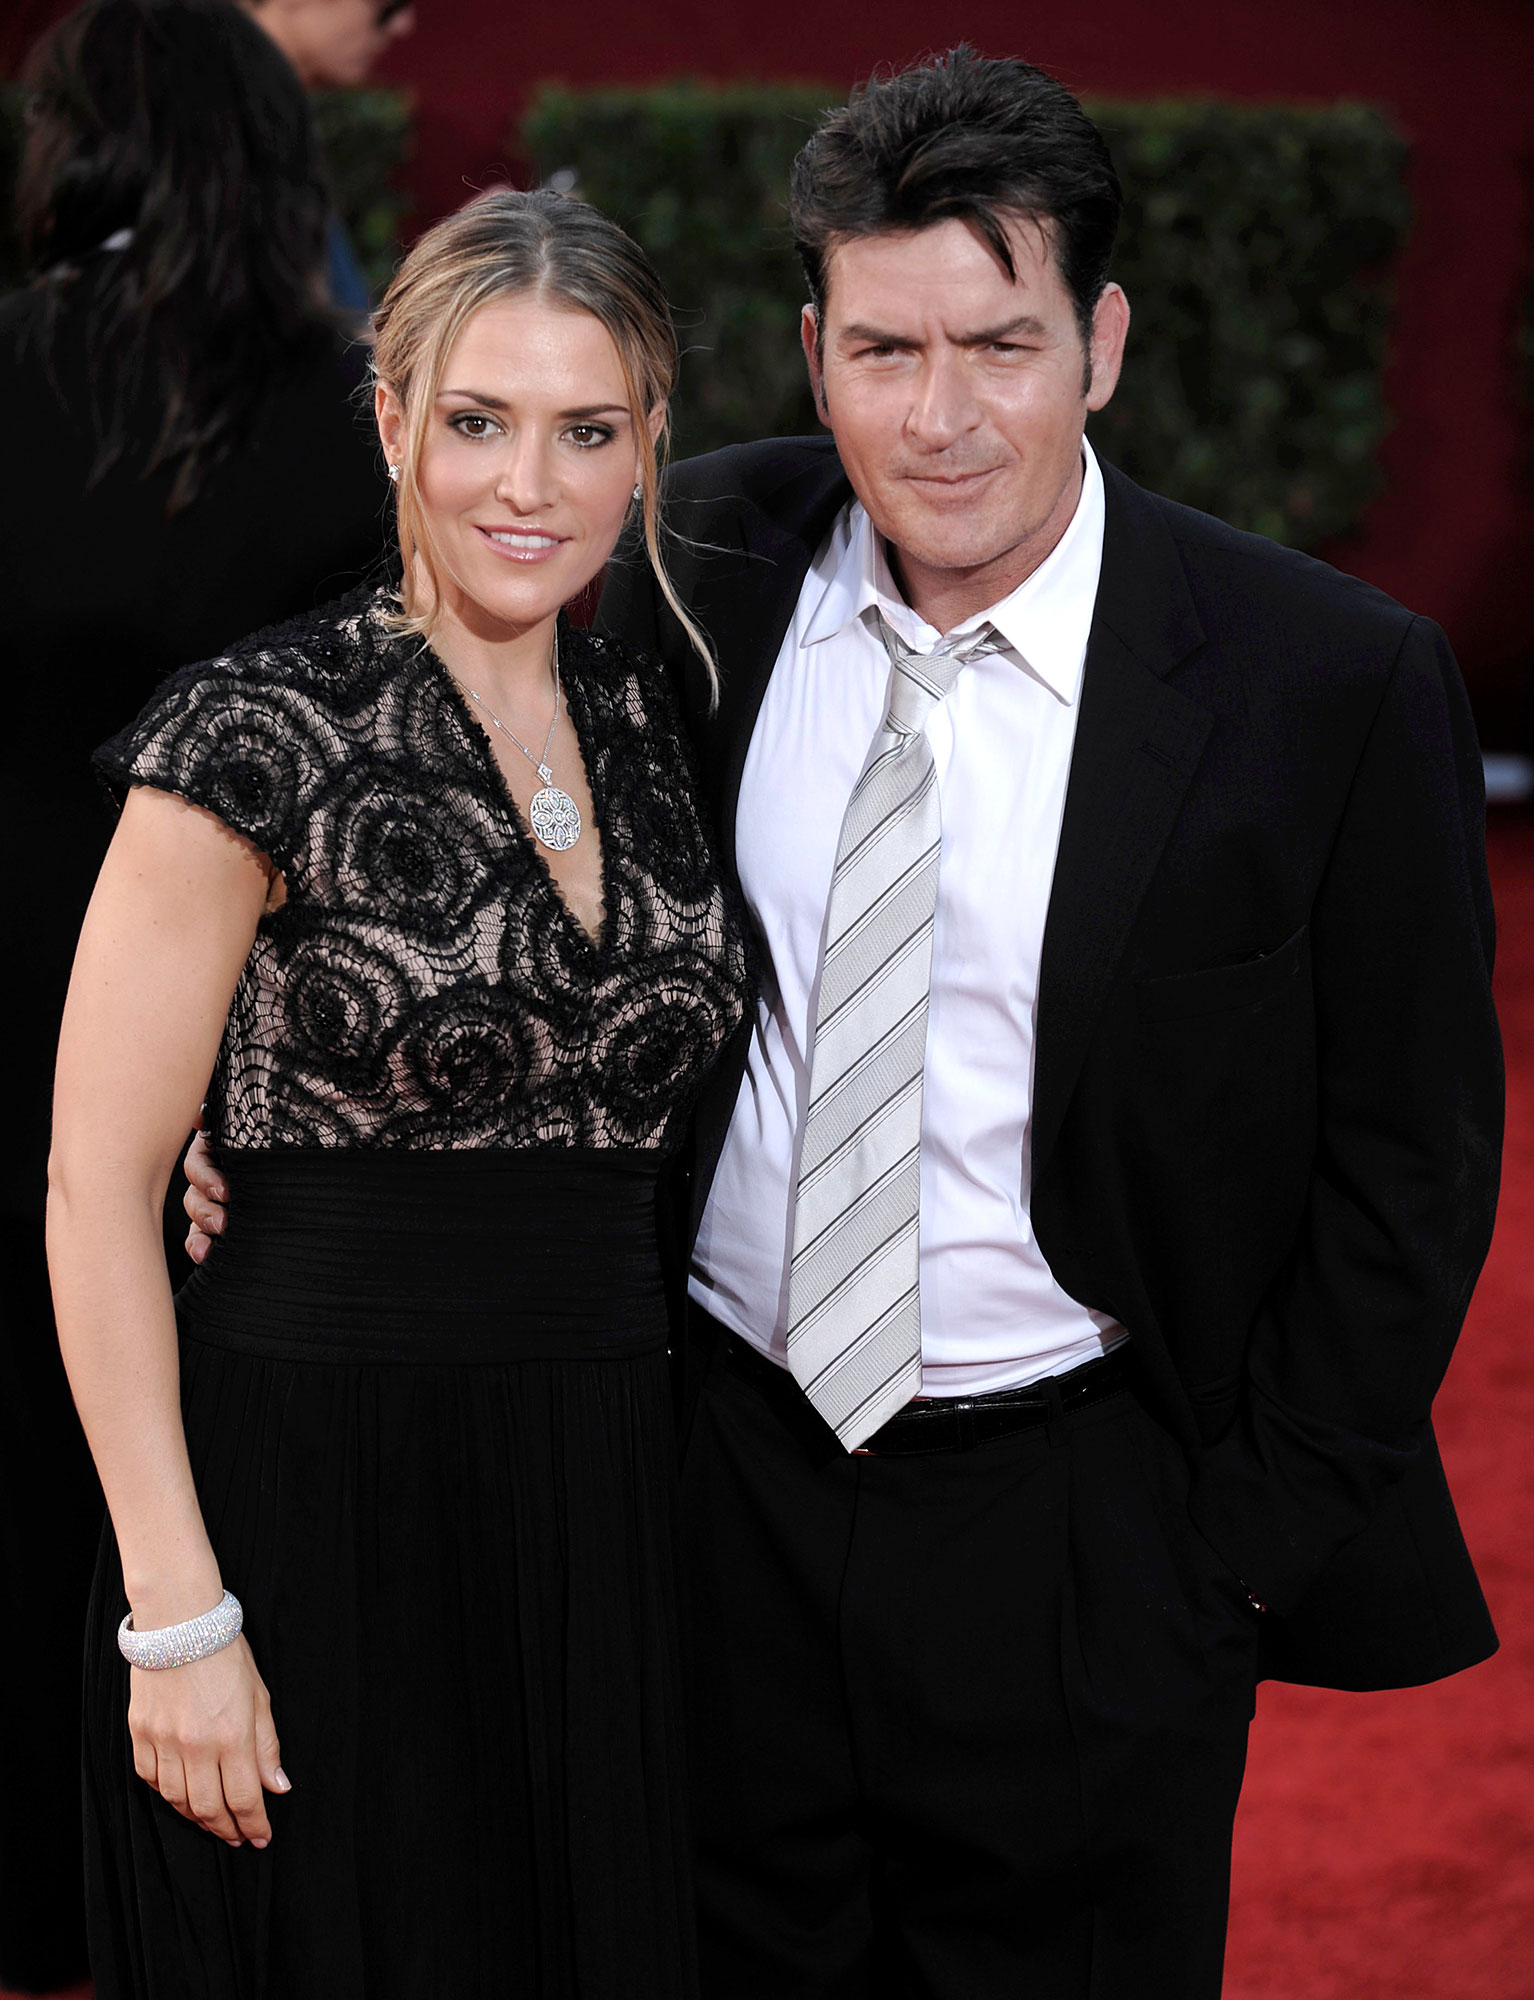 Charlie Sheen, Ex-Wife Brooke Muellers Ups and Downs Split, More